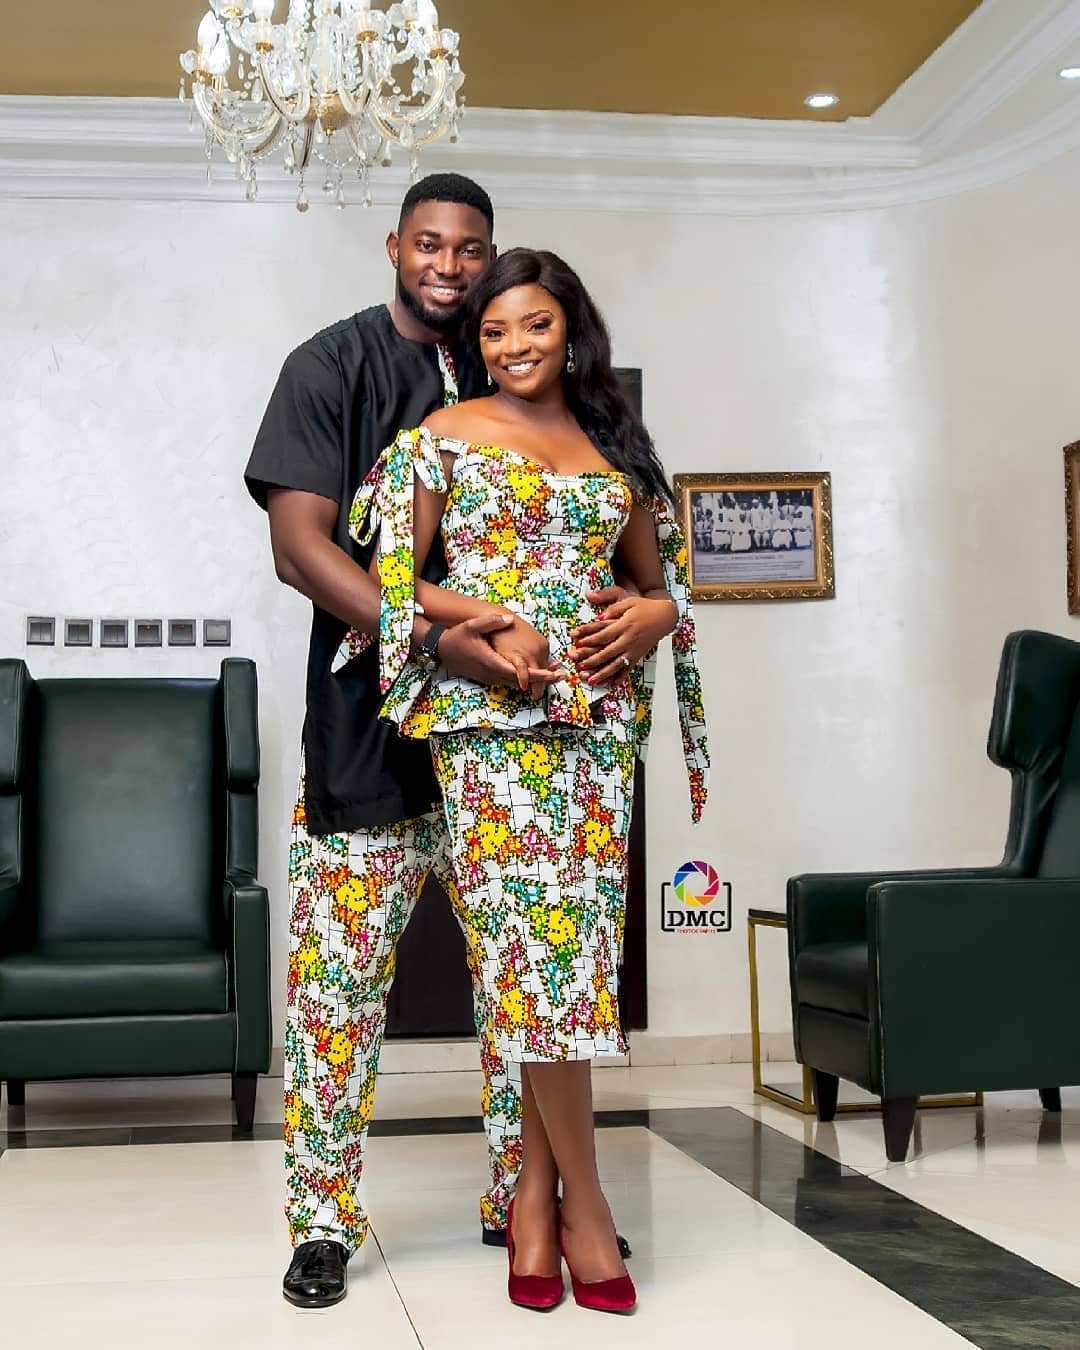 beautiful matching couples ankara designs and styles, latest trendy couples ankara styles, ankara designs for couples, matching ankara styles and designs for couples